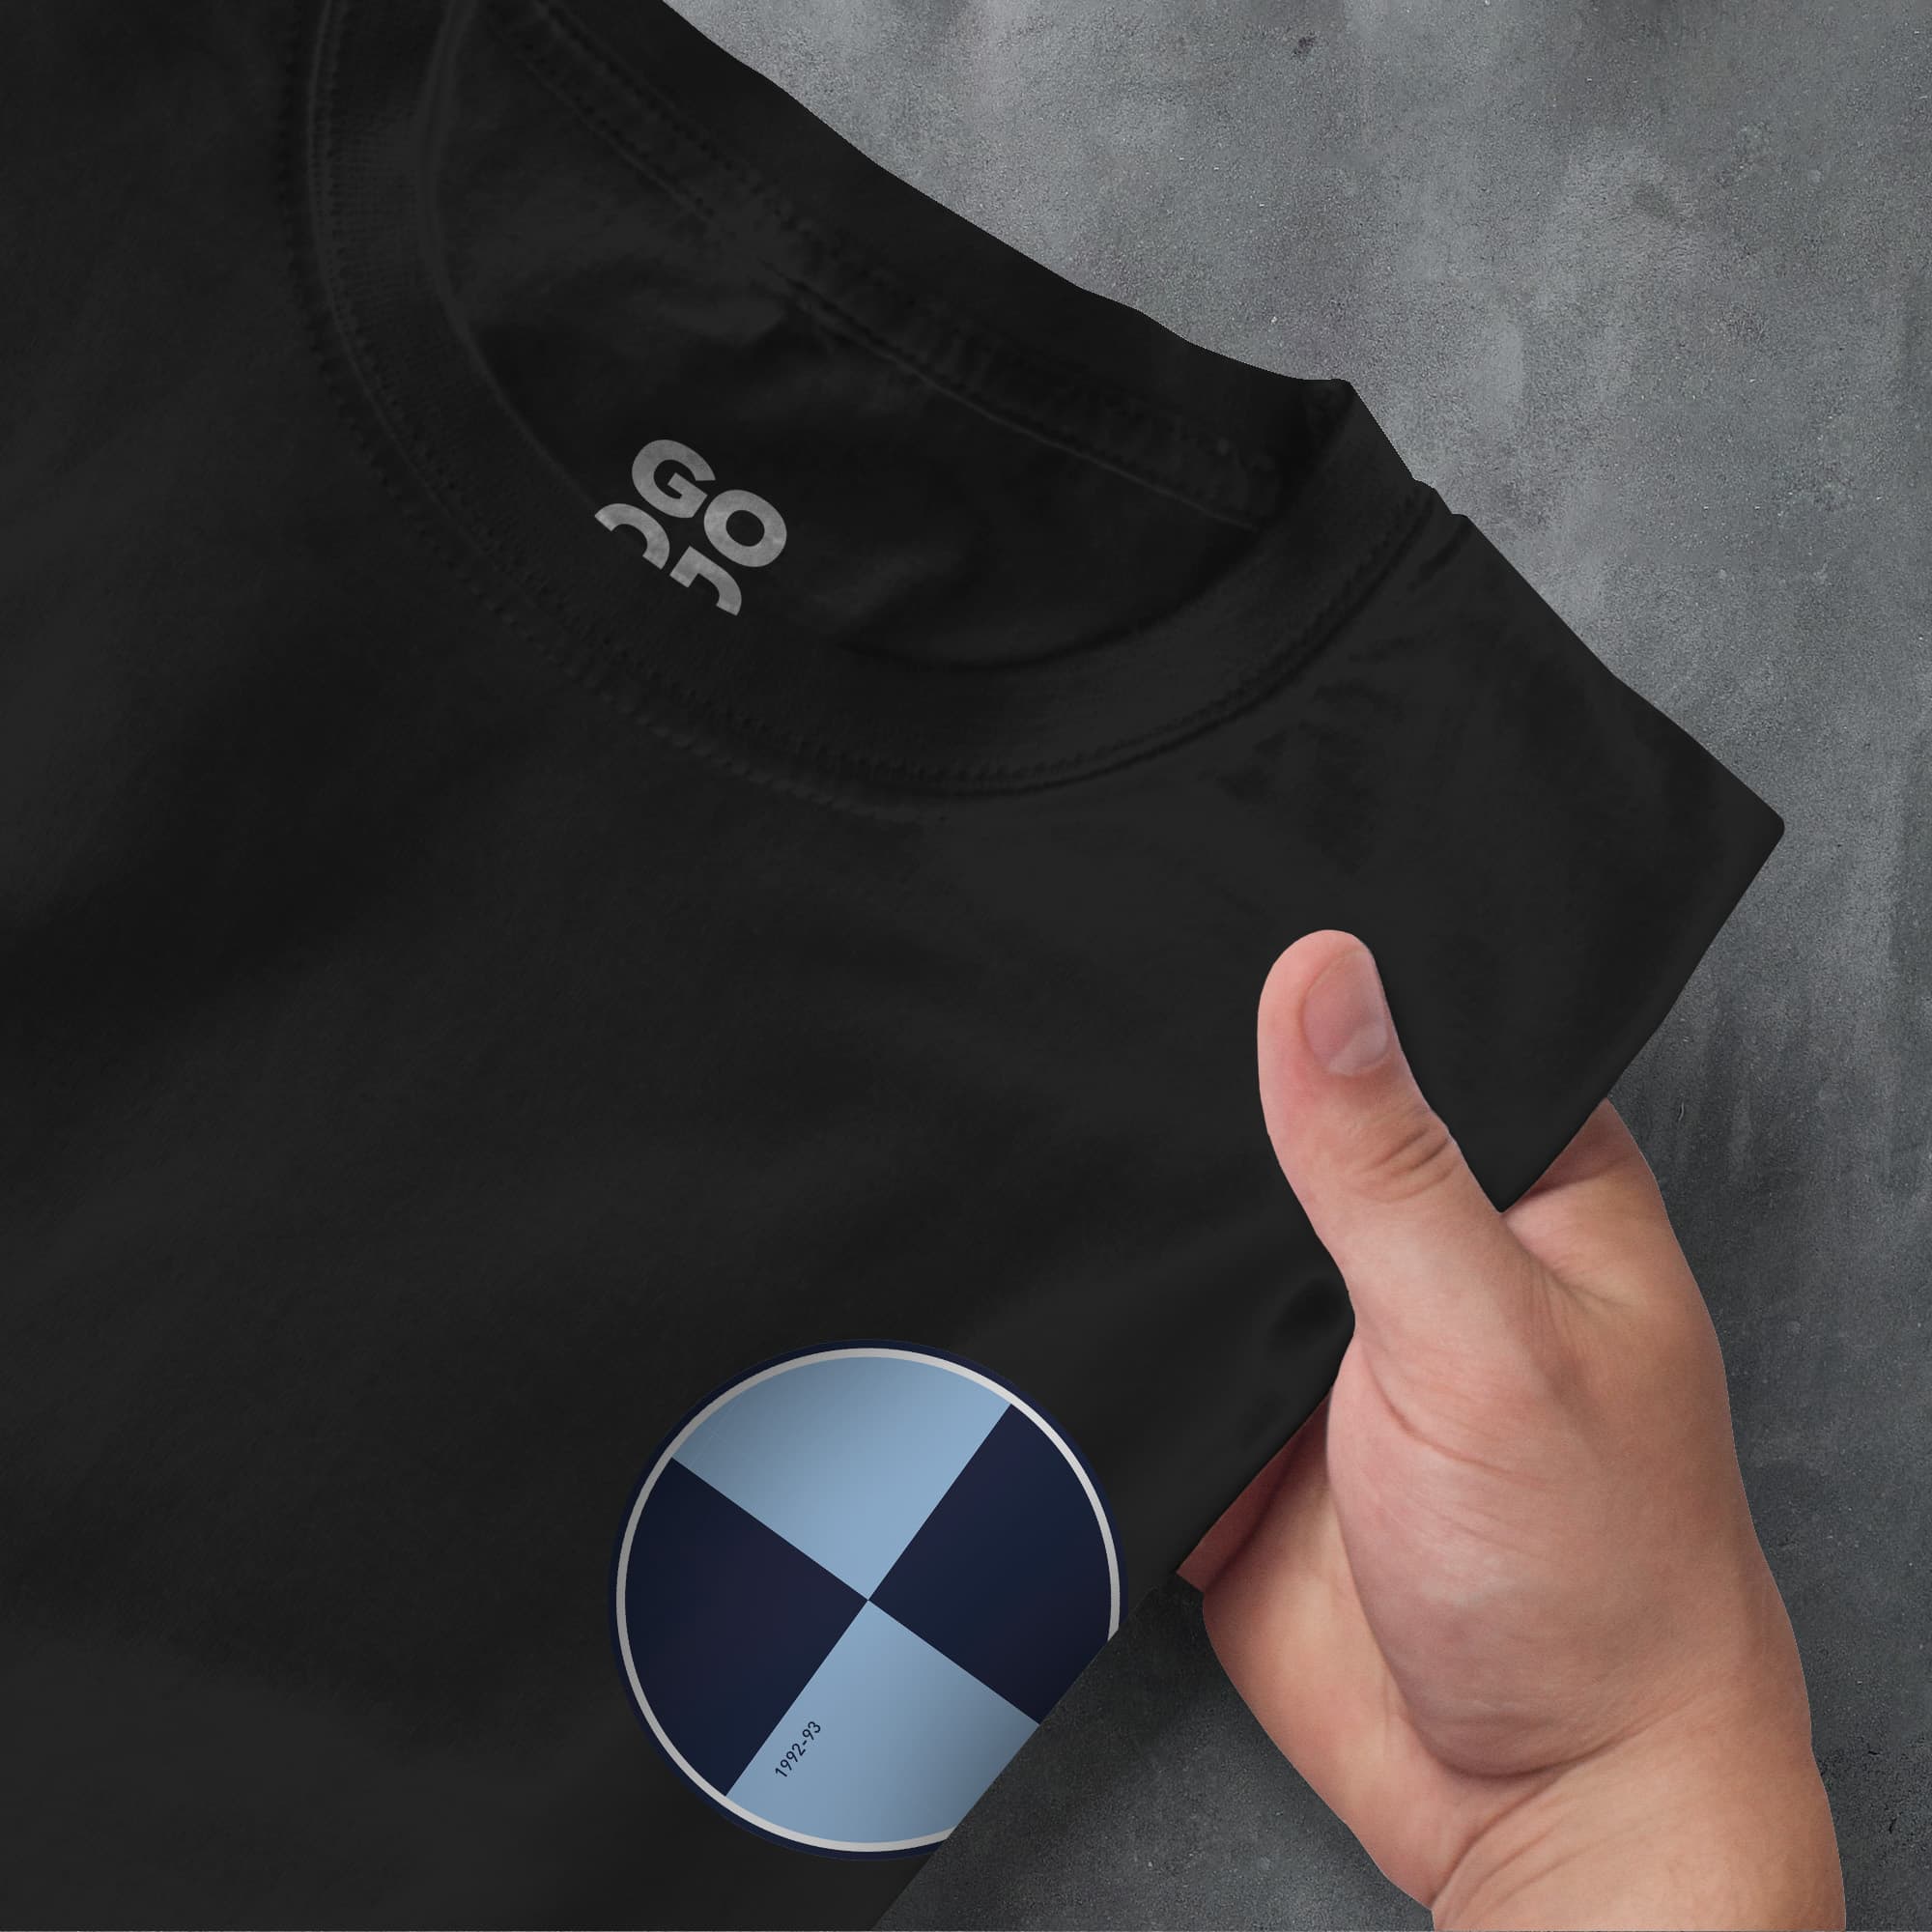 a hand pointing at a black shirt with a blue cross on it